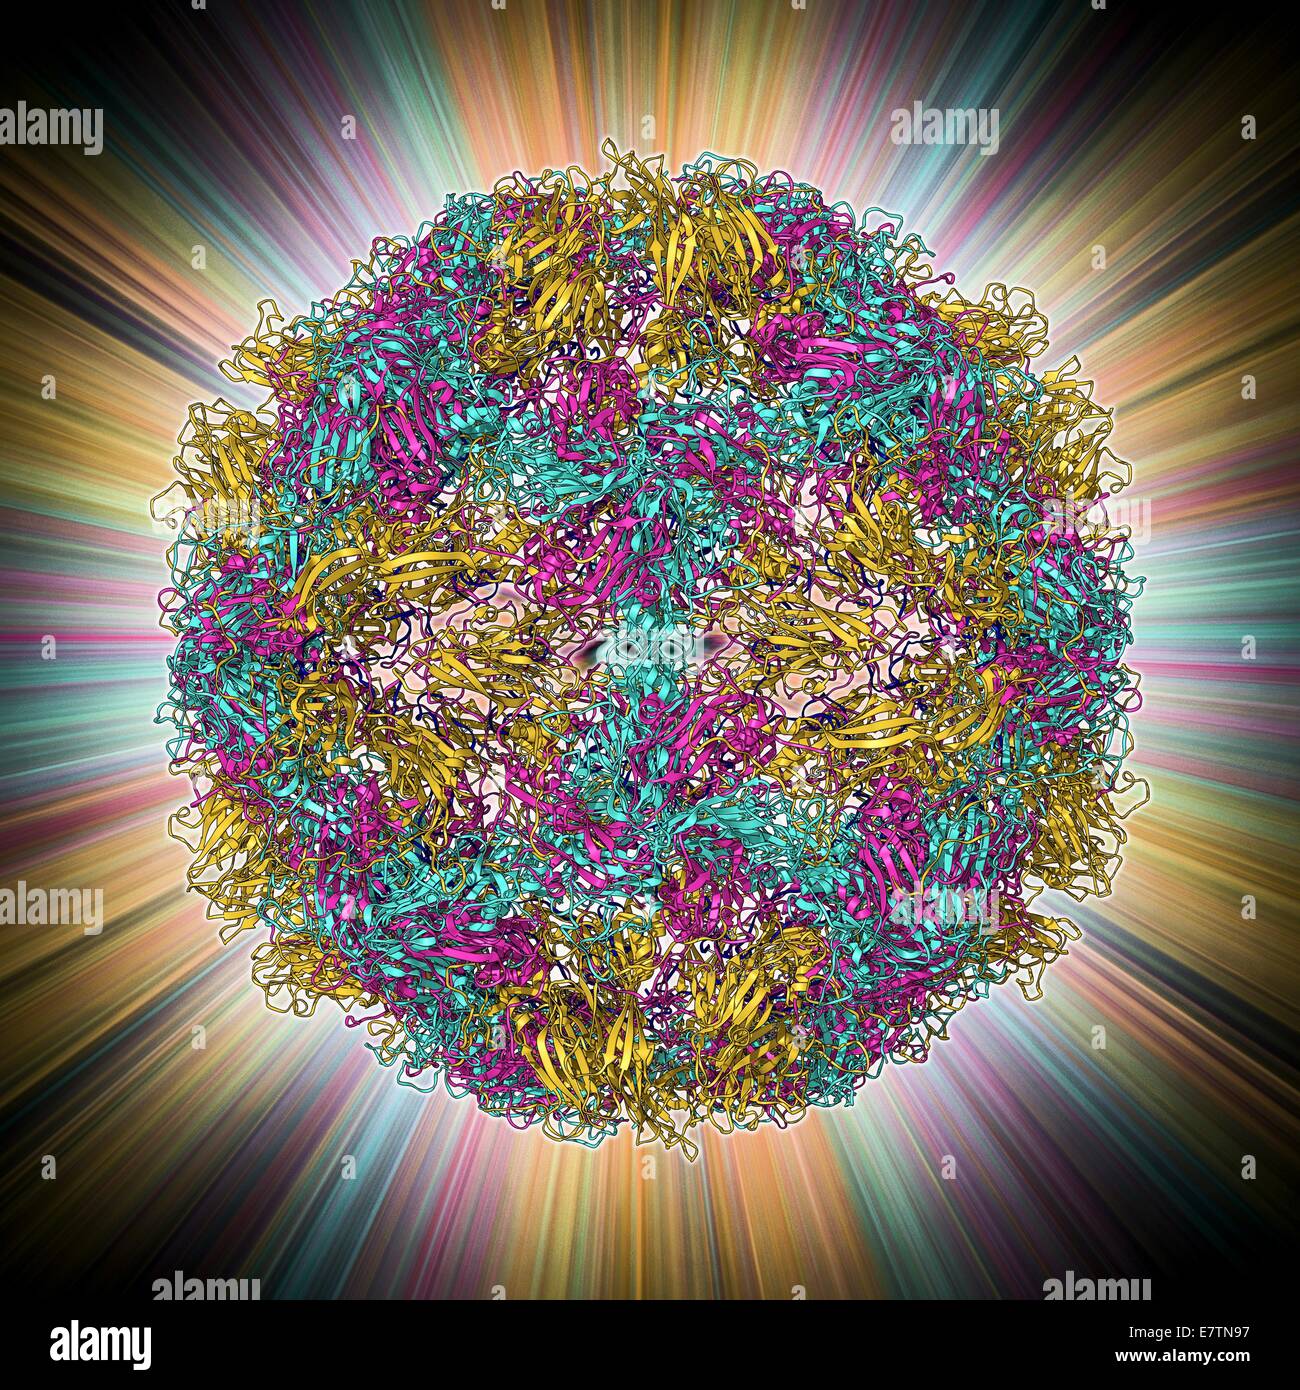 Rhinovirus 14 capsid, molecular model. This is human rhinovirus 14. The rhinovirus infects the upper respiratory tract and is the cause of the common cold. It is spread by coughs and sneezes. In viruses, the capsid is the protein shell that encloses the g Stock Photo